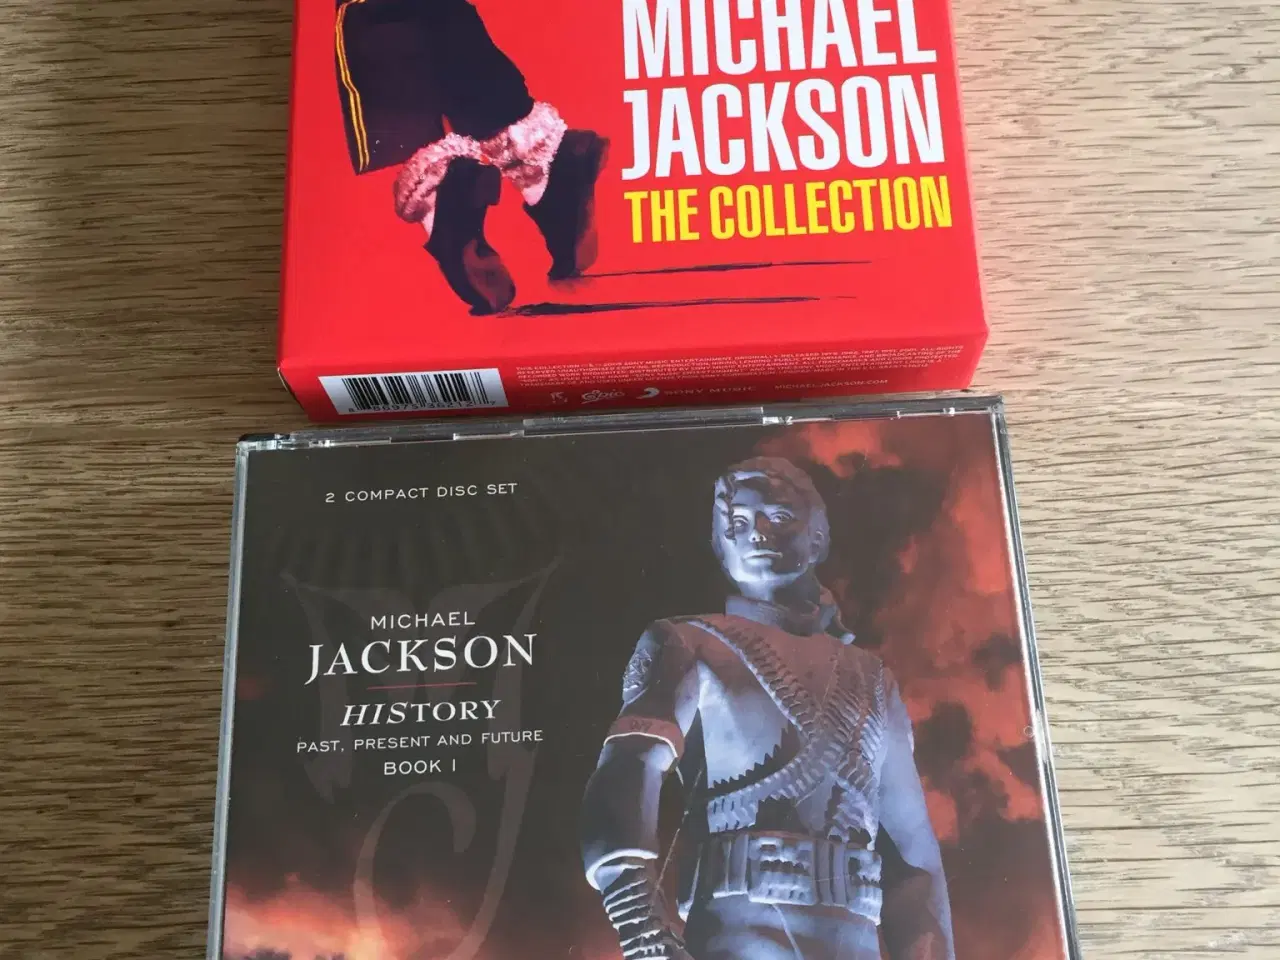 Billede 1 - Michael Jackson, 5xcd, The collection